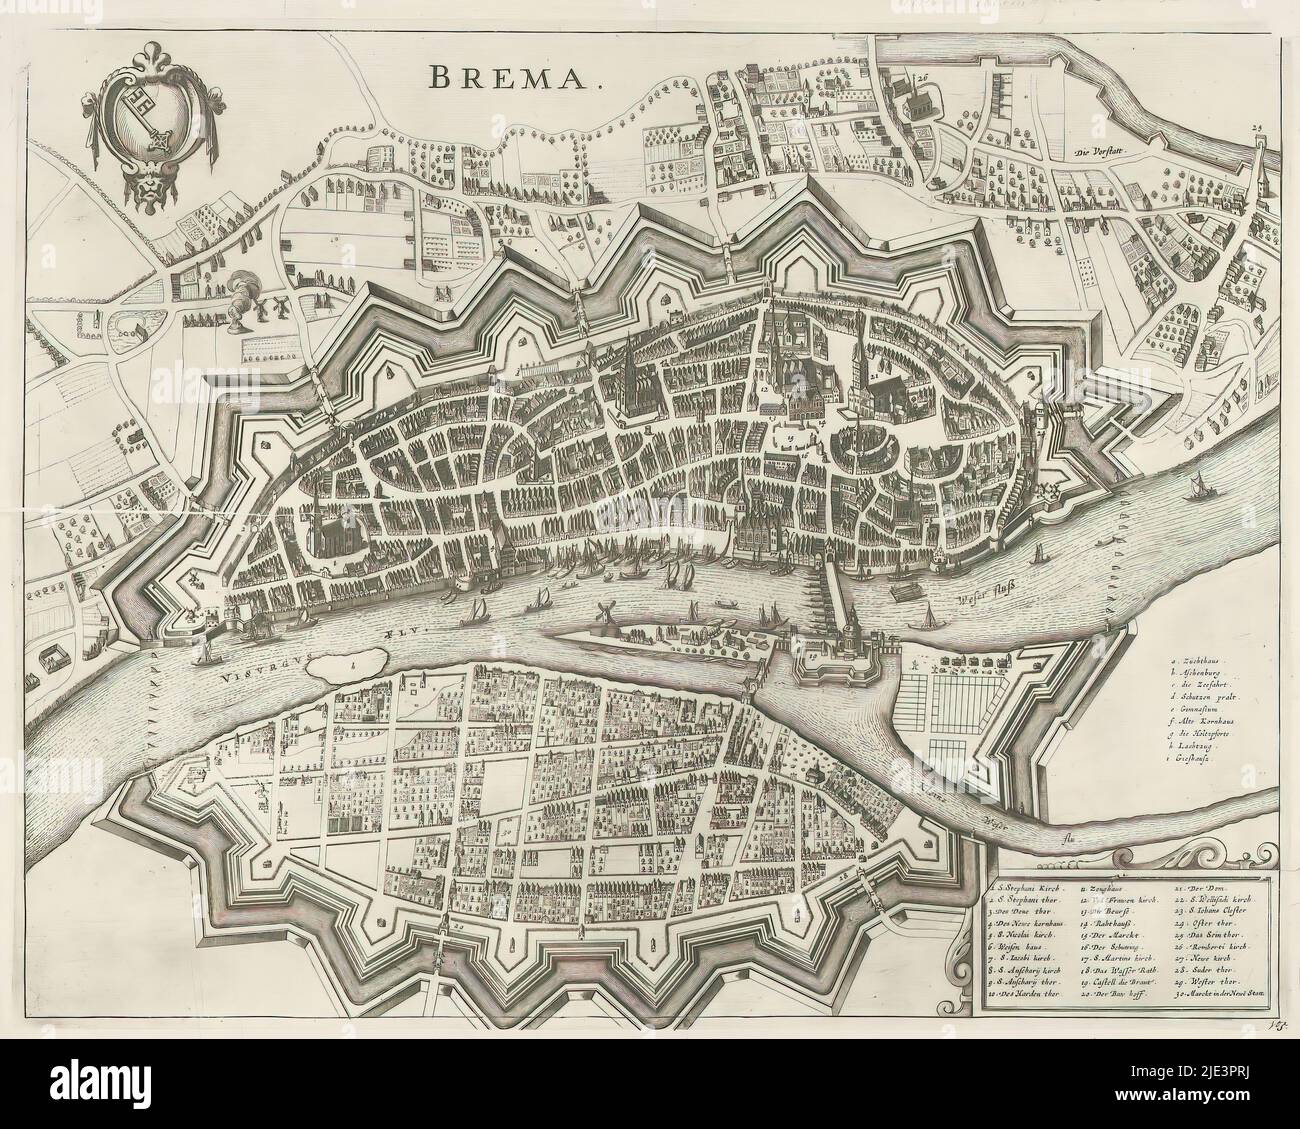 Map of Bremen, Brema (title on object), print maker: anonymous, publisher: Frederik de Wit, (possibly), publisher: Pieter van der Aa (I), (possibly), publisher: Amsterdam, publisher: Leiden, 1657 and/or 1690 - 1728, paper, engraving, etching, height 408 mm × width 515 mm Stock Photo